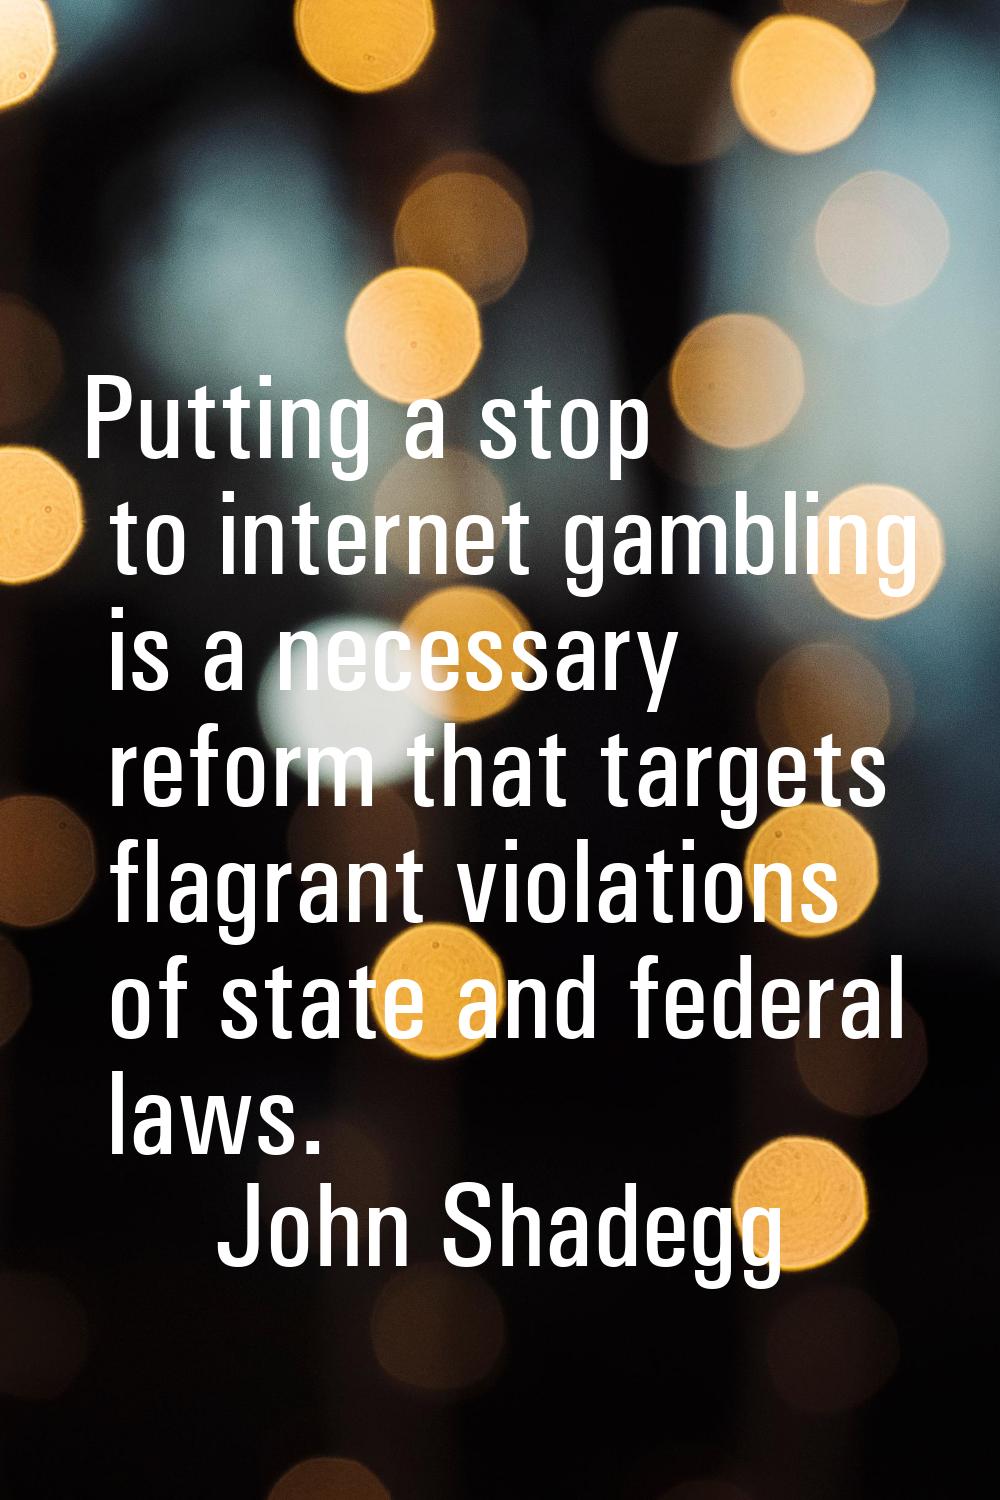 Putting a stop to internet gambling is a necessary reform that targets flagrant violations of state